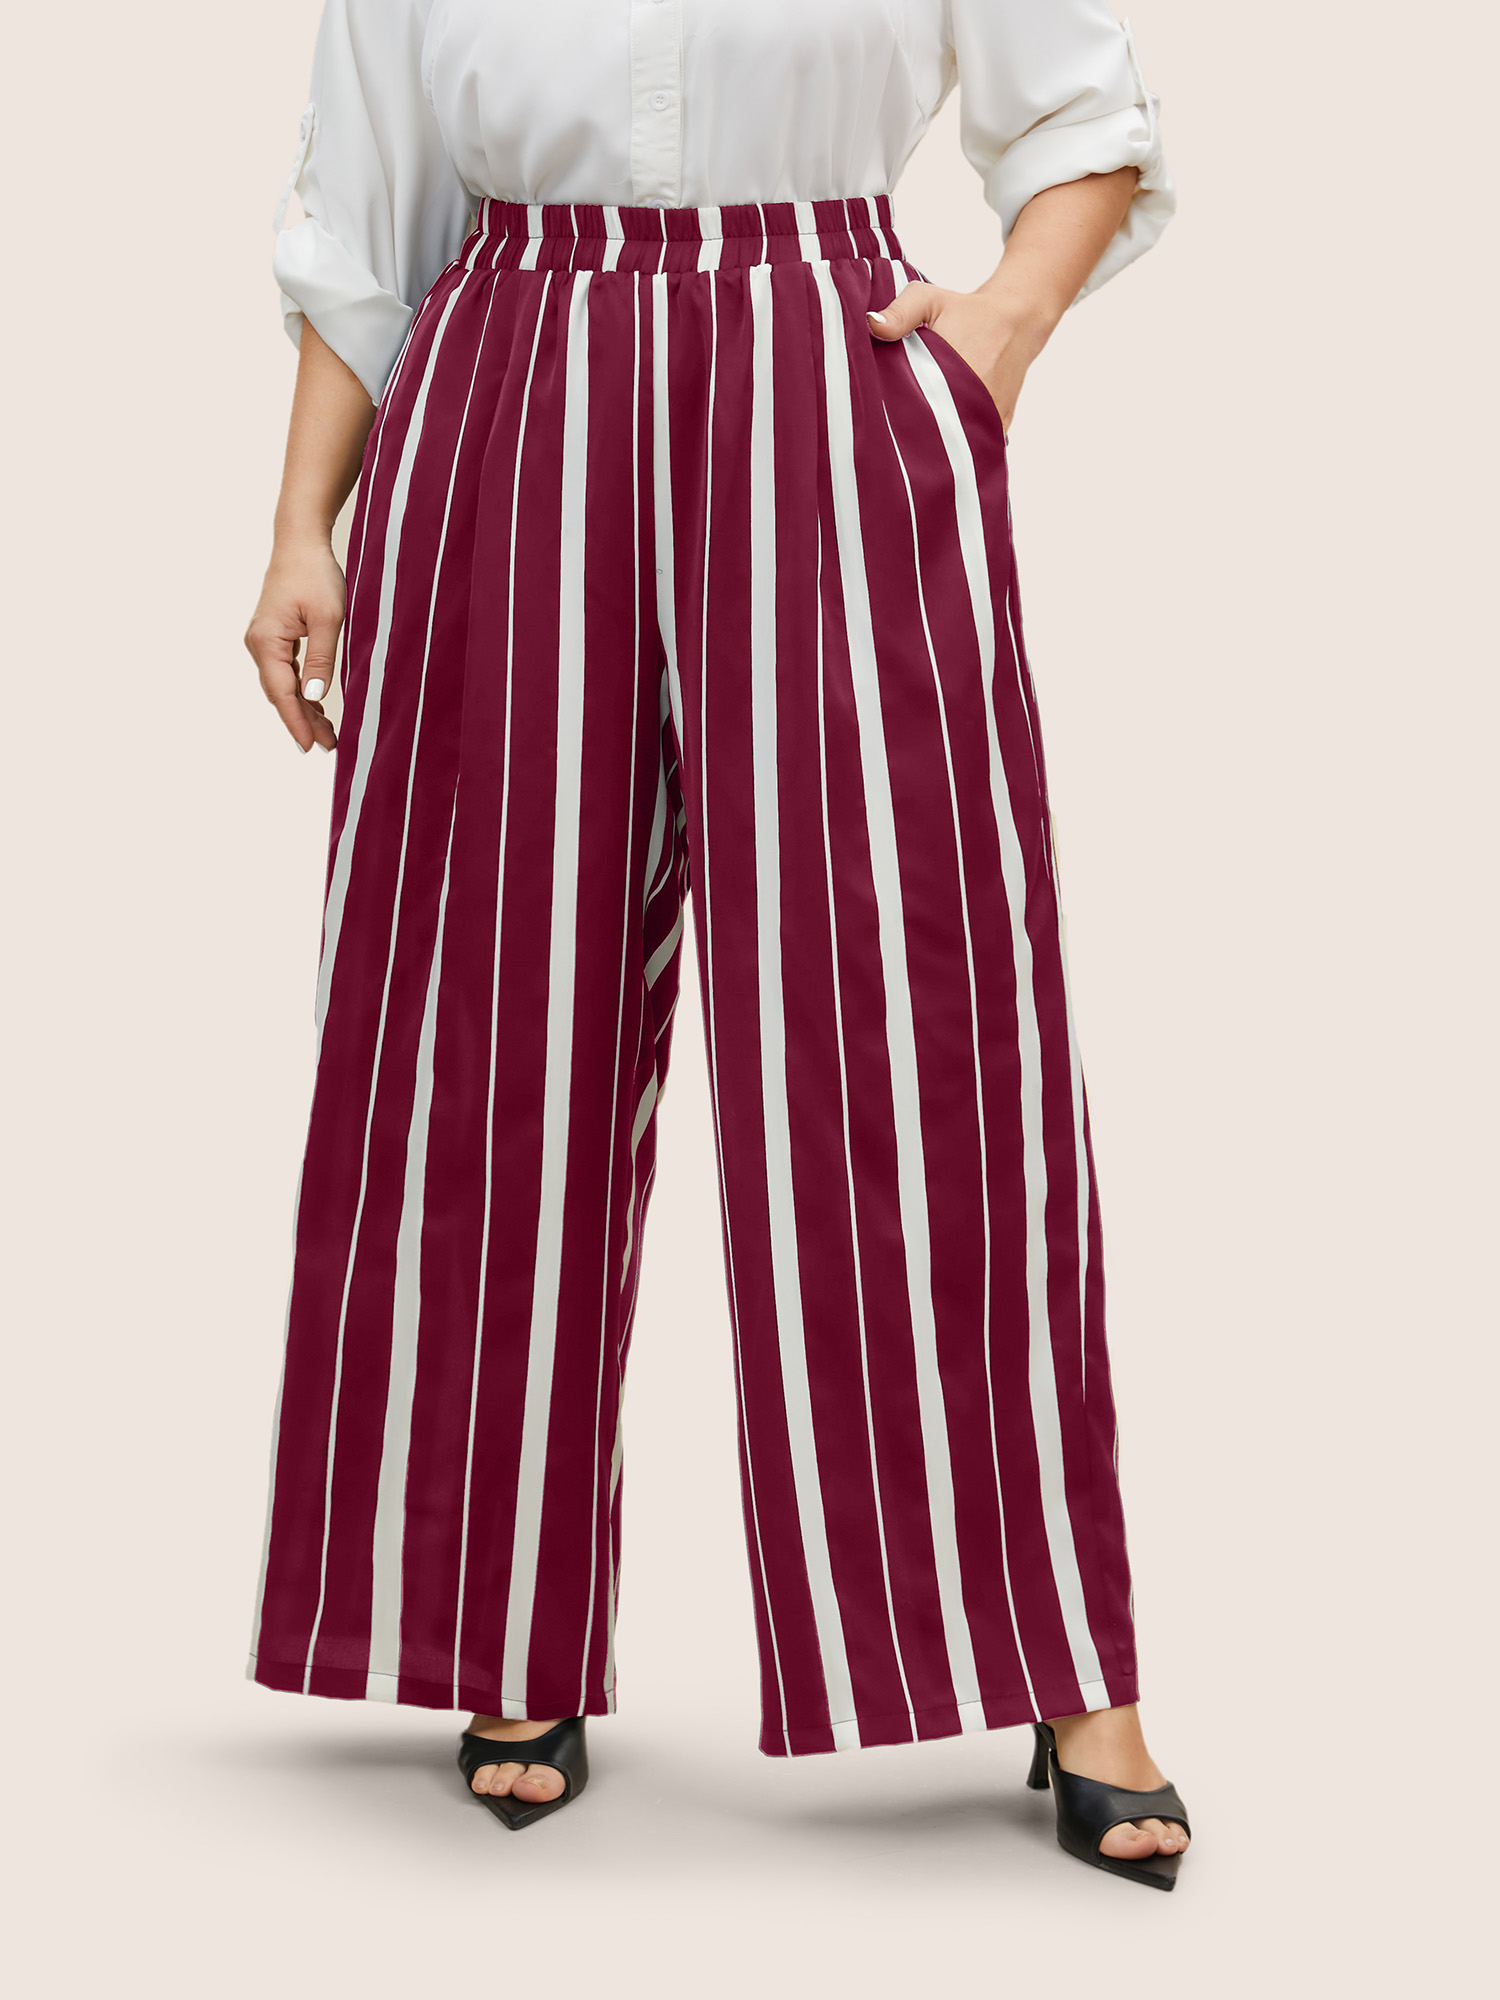 

Plus Size Striped Elastic Waist Wide Leg Pants Women Scarlet At the Office Wide Leg High Rise Work Pants BloomChic